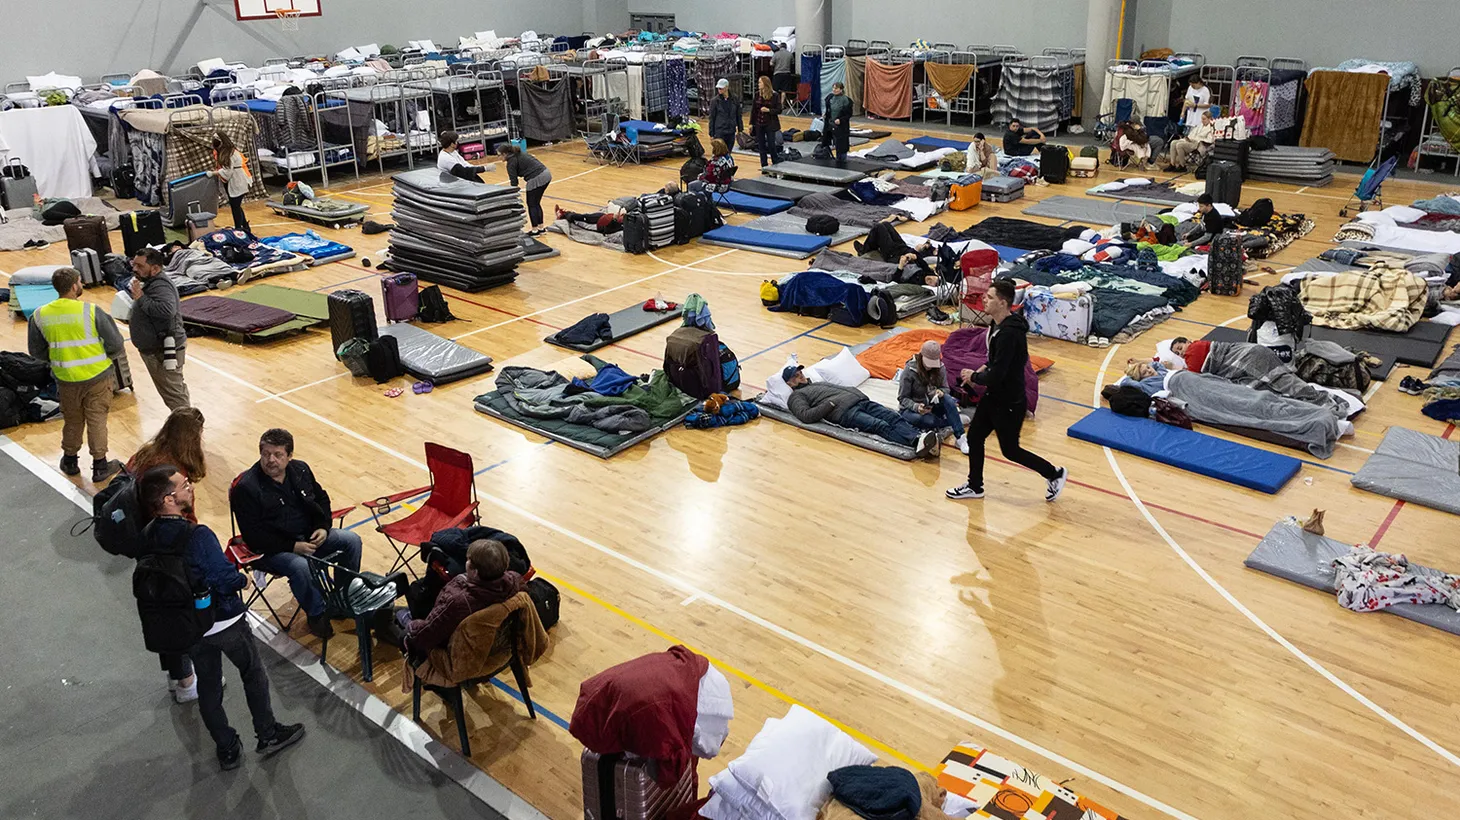 The Benito Juárez sports complex is lined with dozens of bunk beds and hundreds of sleeping mats, housing thousands of Ukrainian refugees seeking to reunite with their families in the United States.